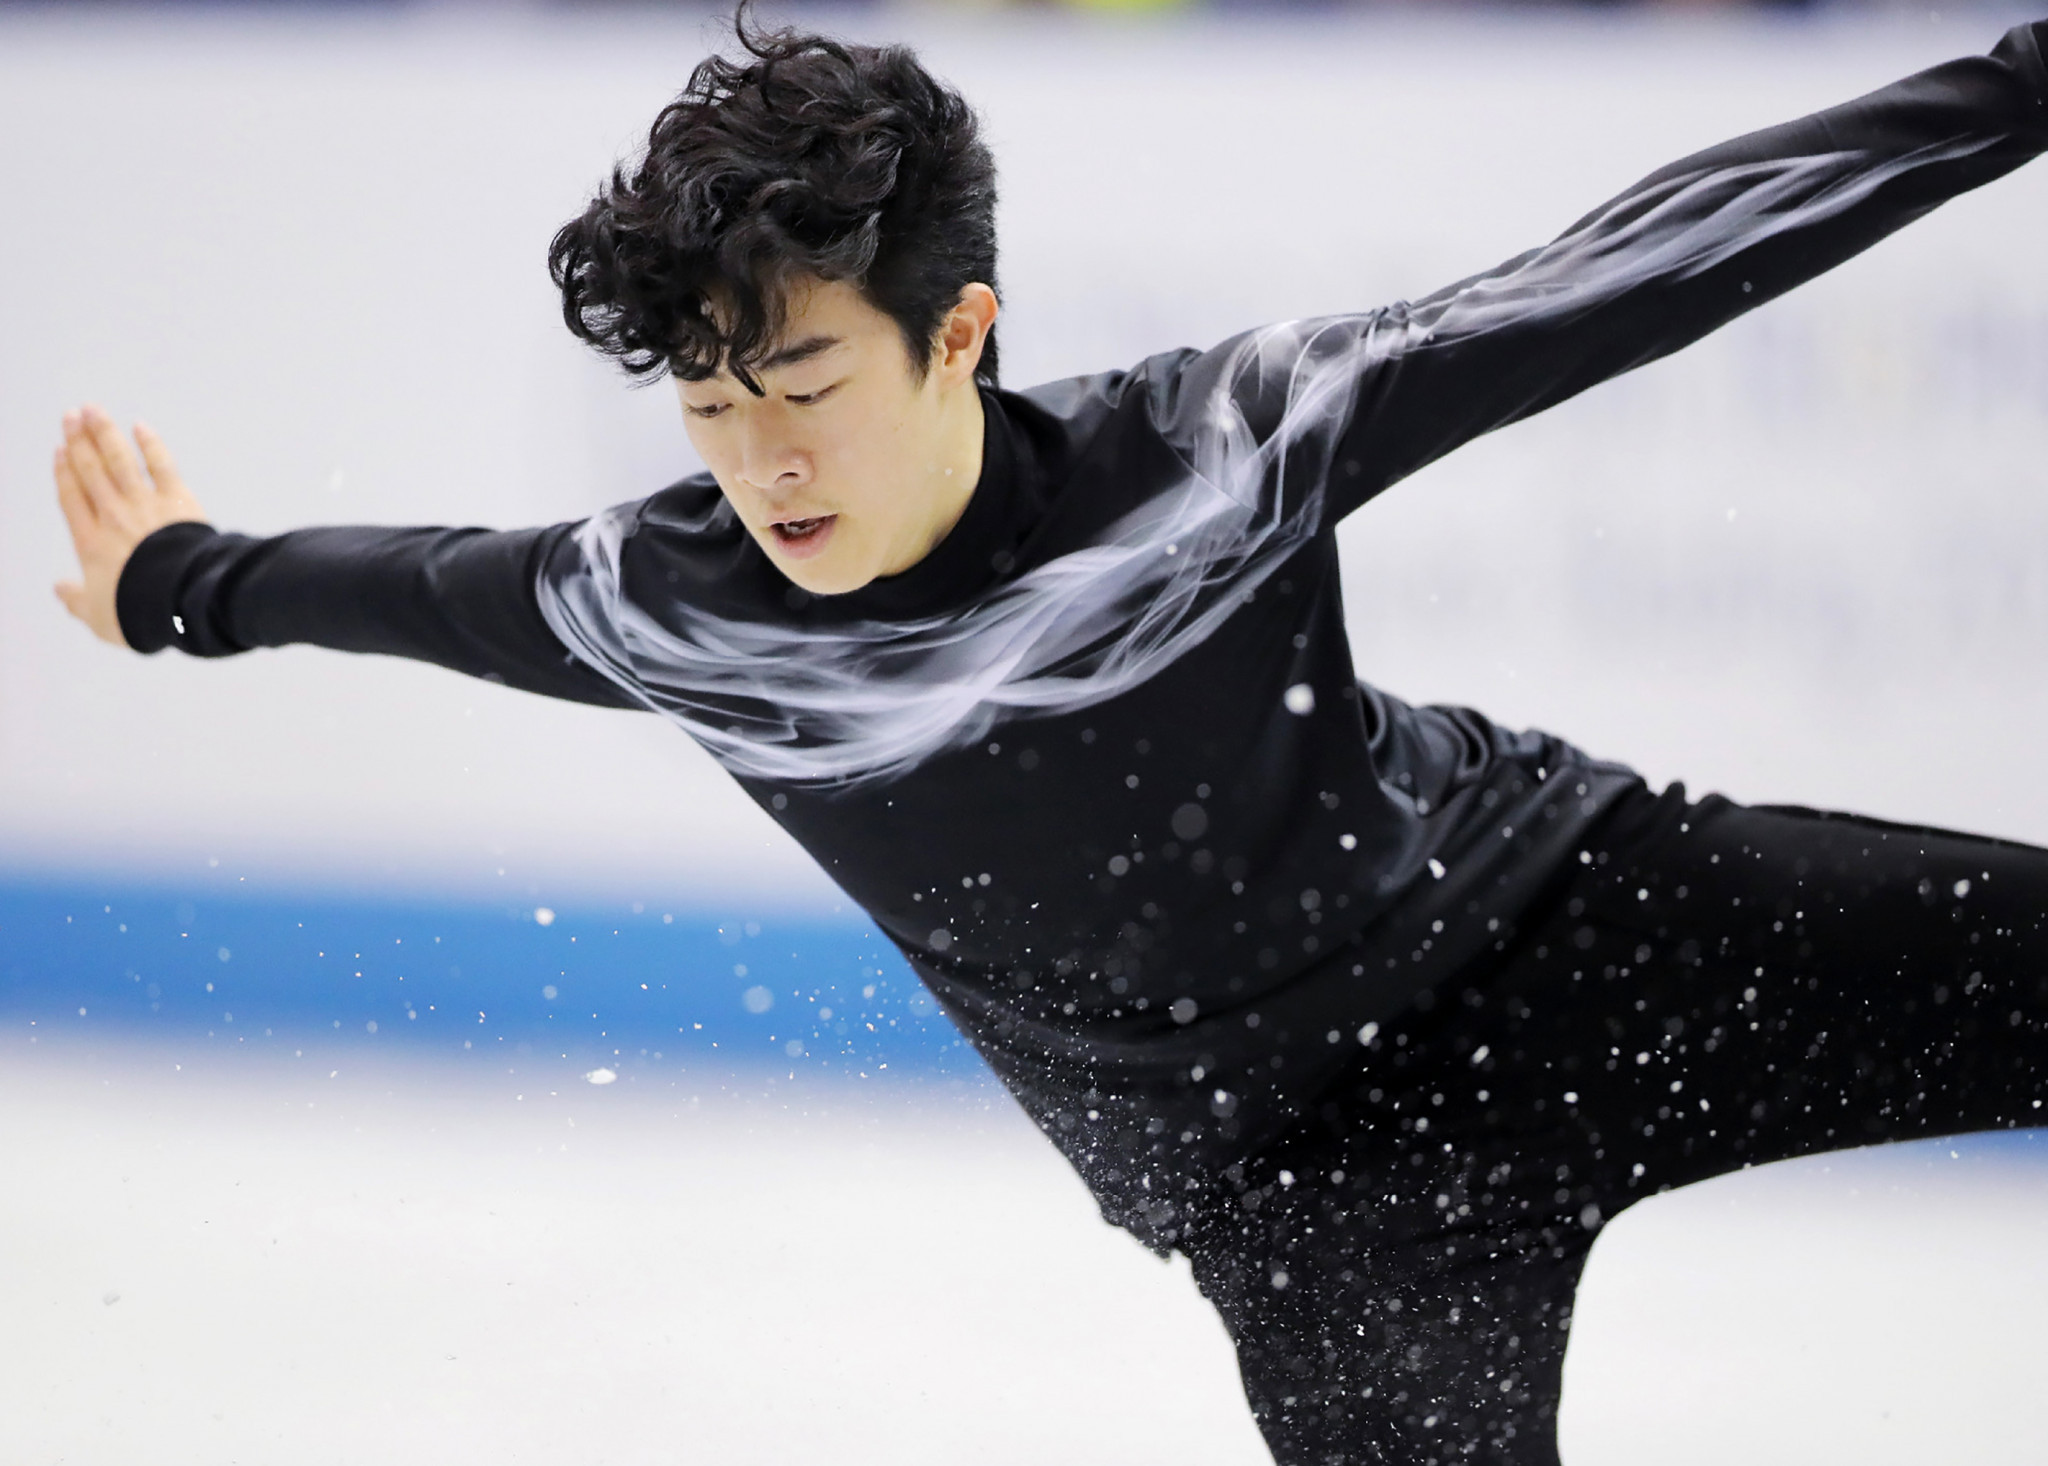 Nathan Chen of the United States leads the men's event at Skate America ©Getty Images